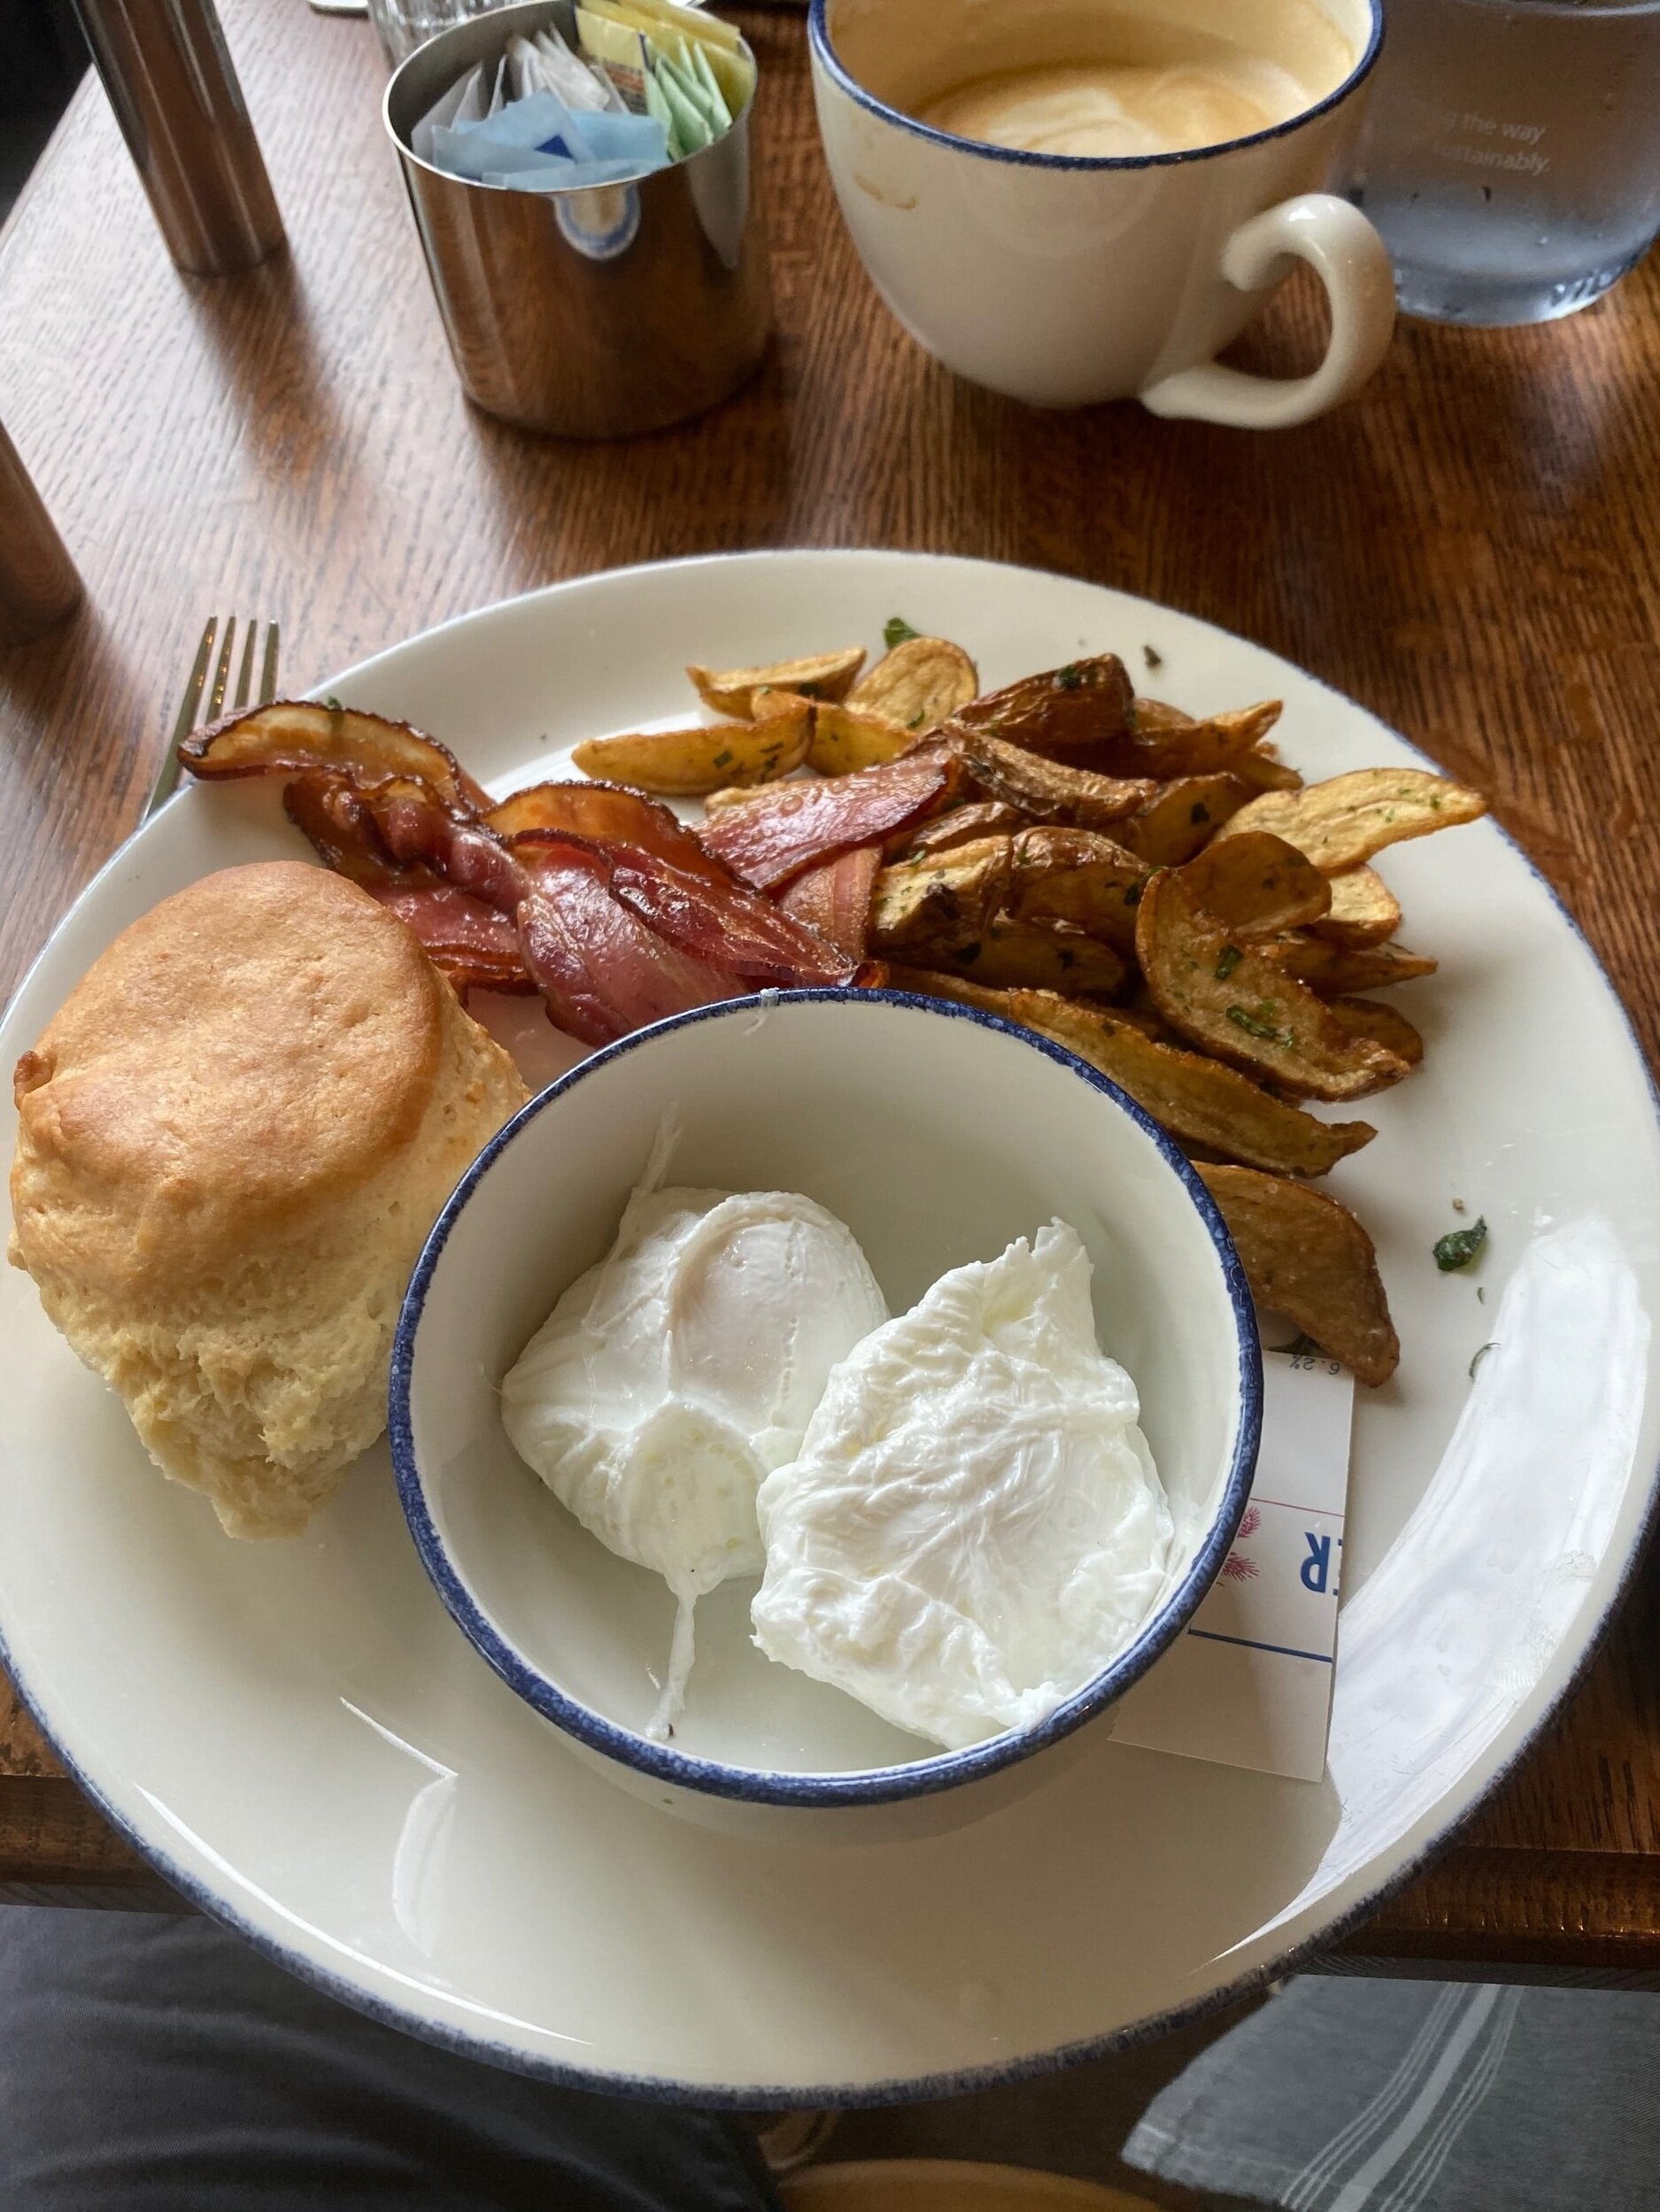 The biscuit and crispy, smoked bacon were a highlight.